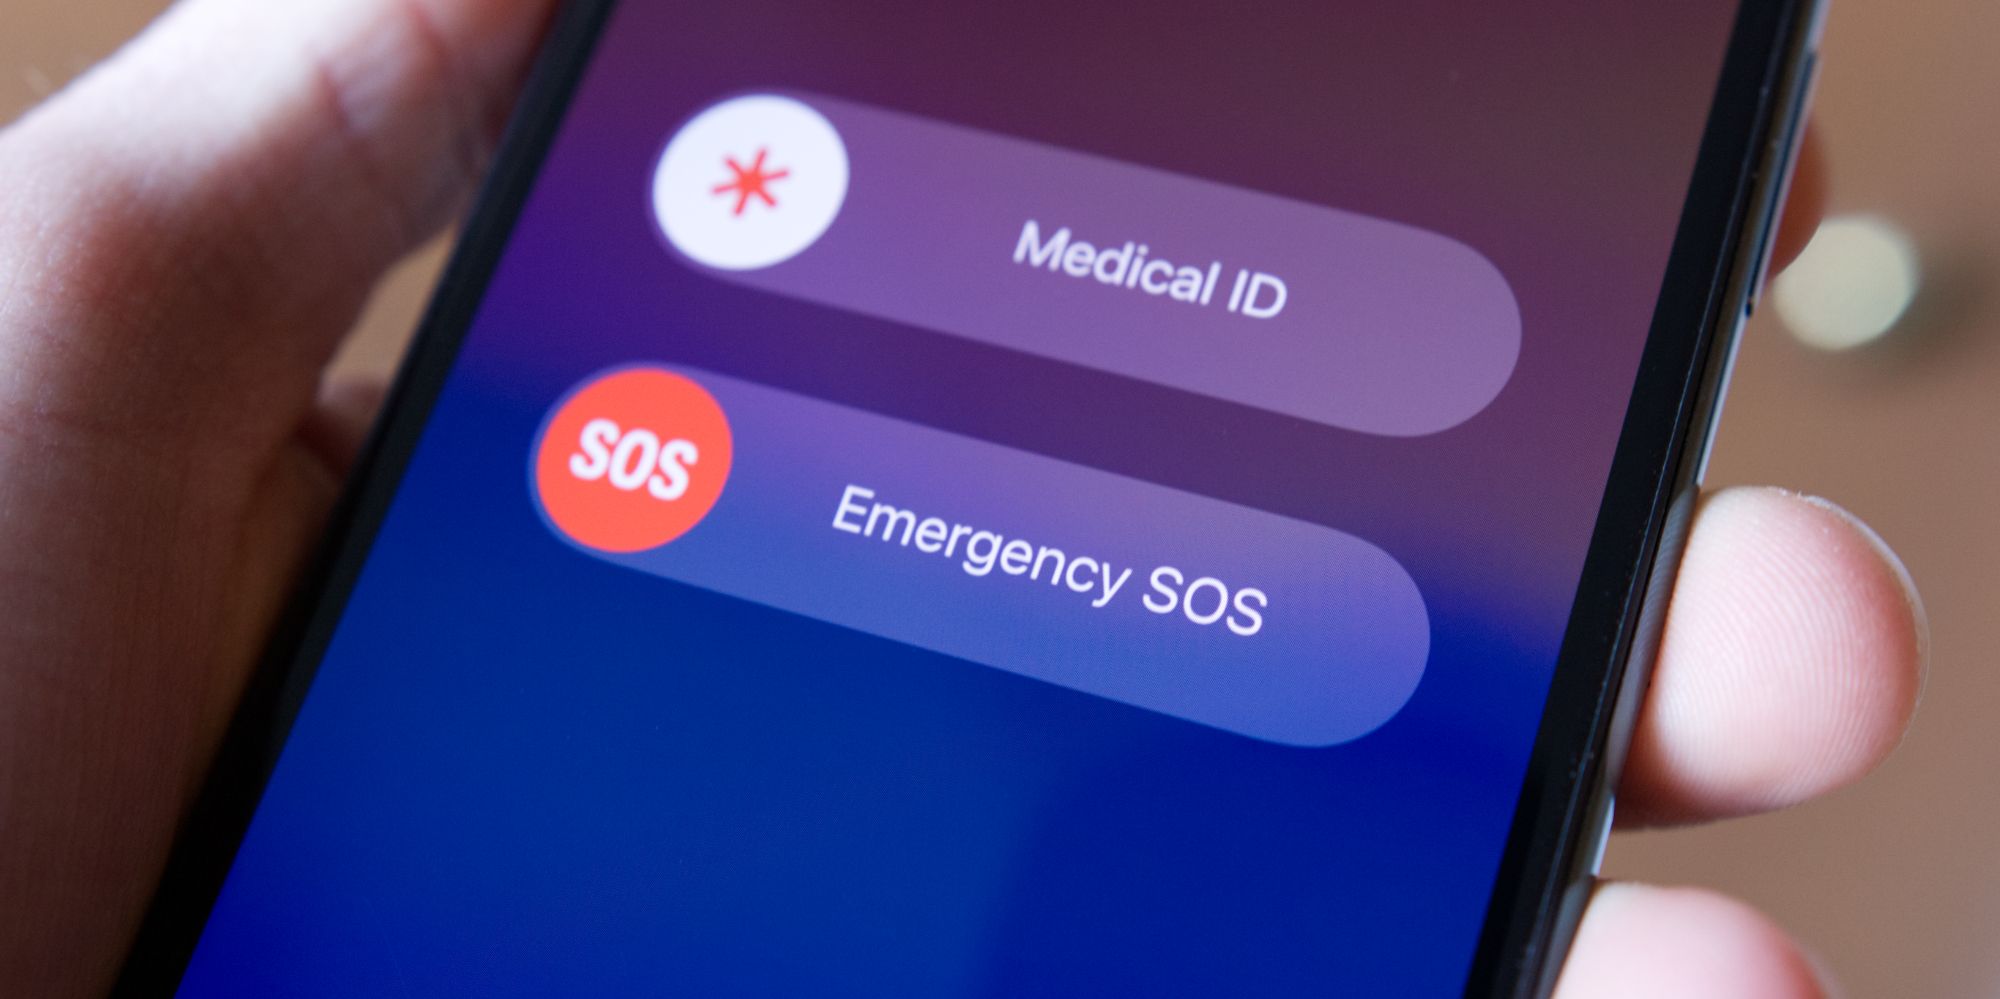 Emergency SOS feature on an iPhone